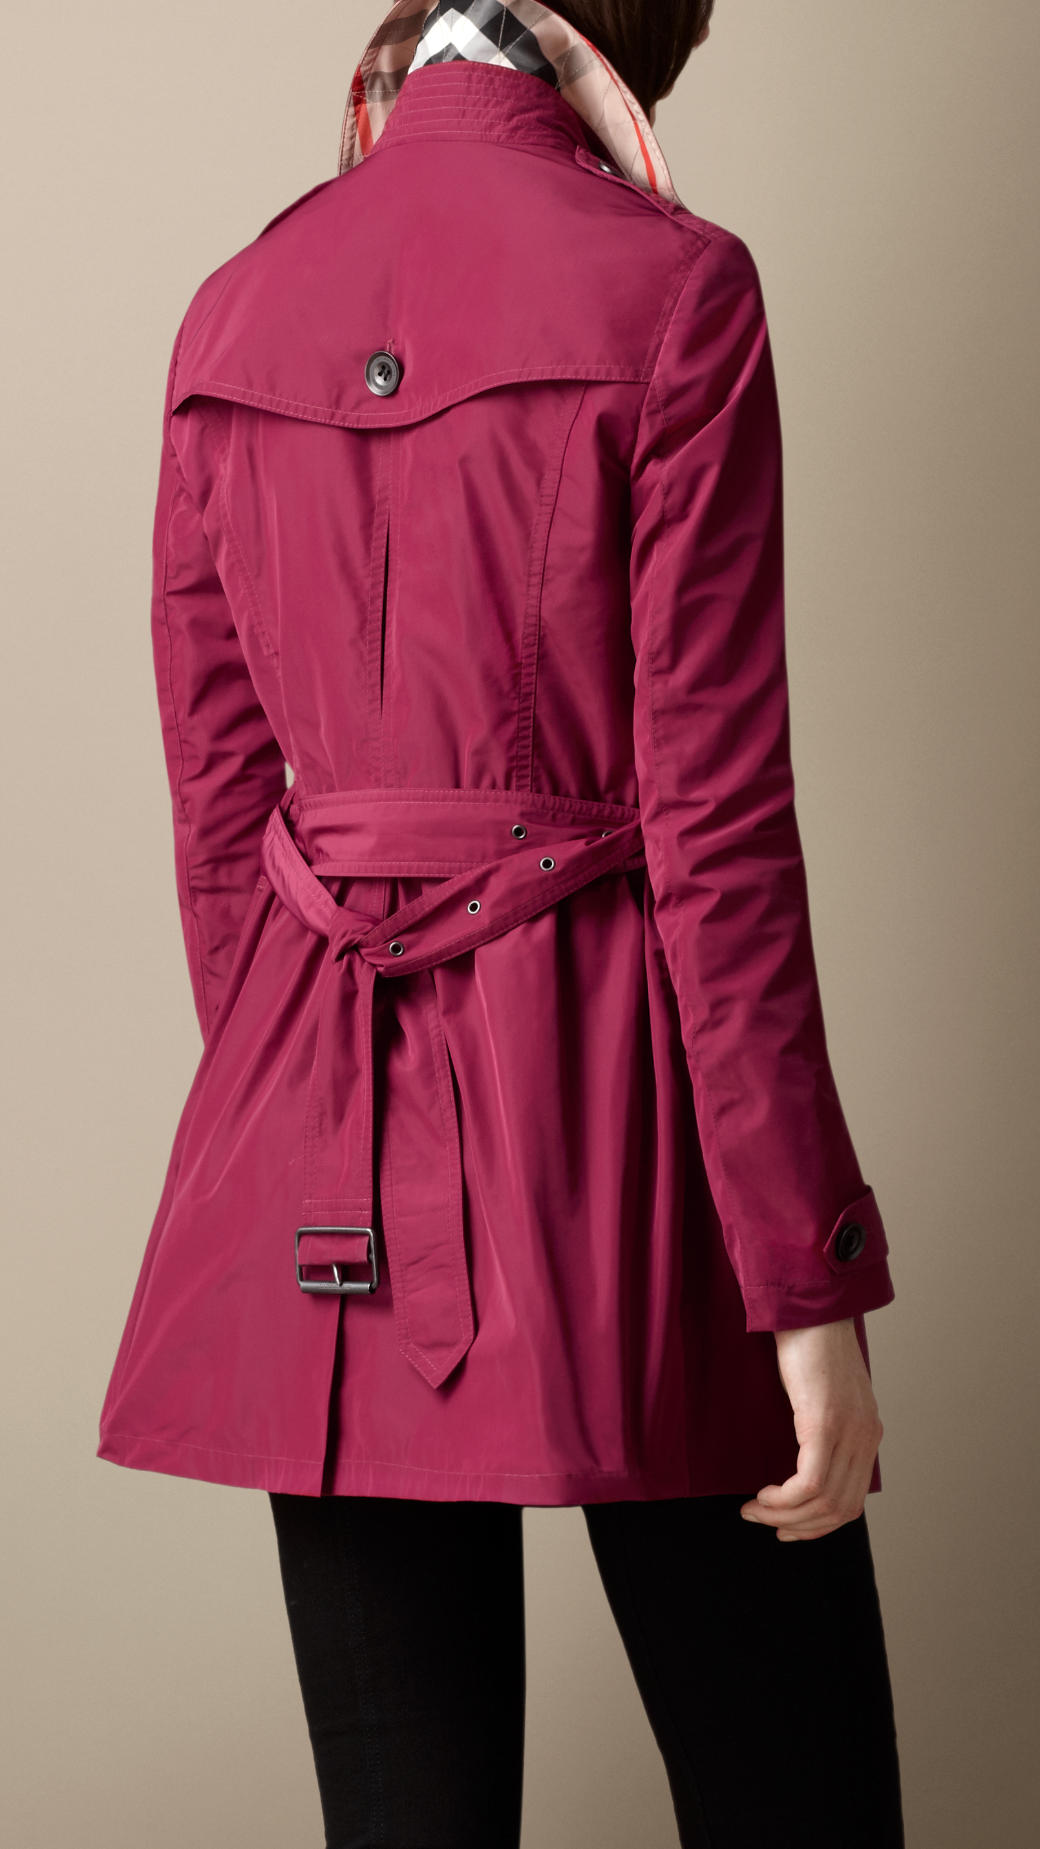 Burberry Short Gathered Skirt Trench Coat in Pink | Lyst